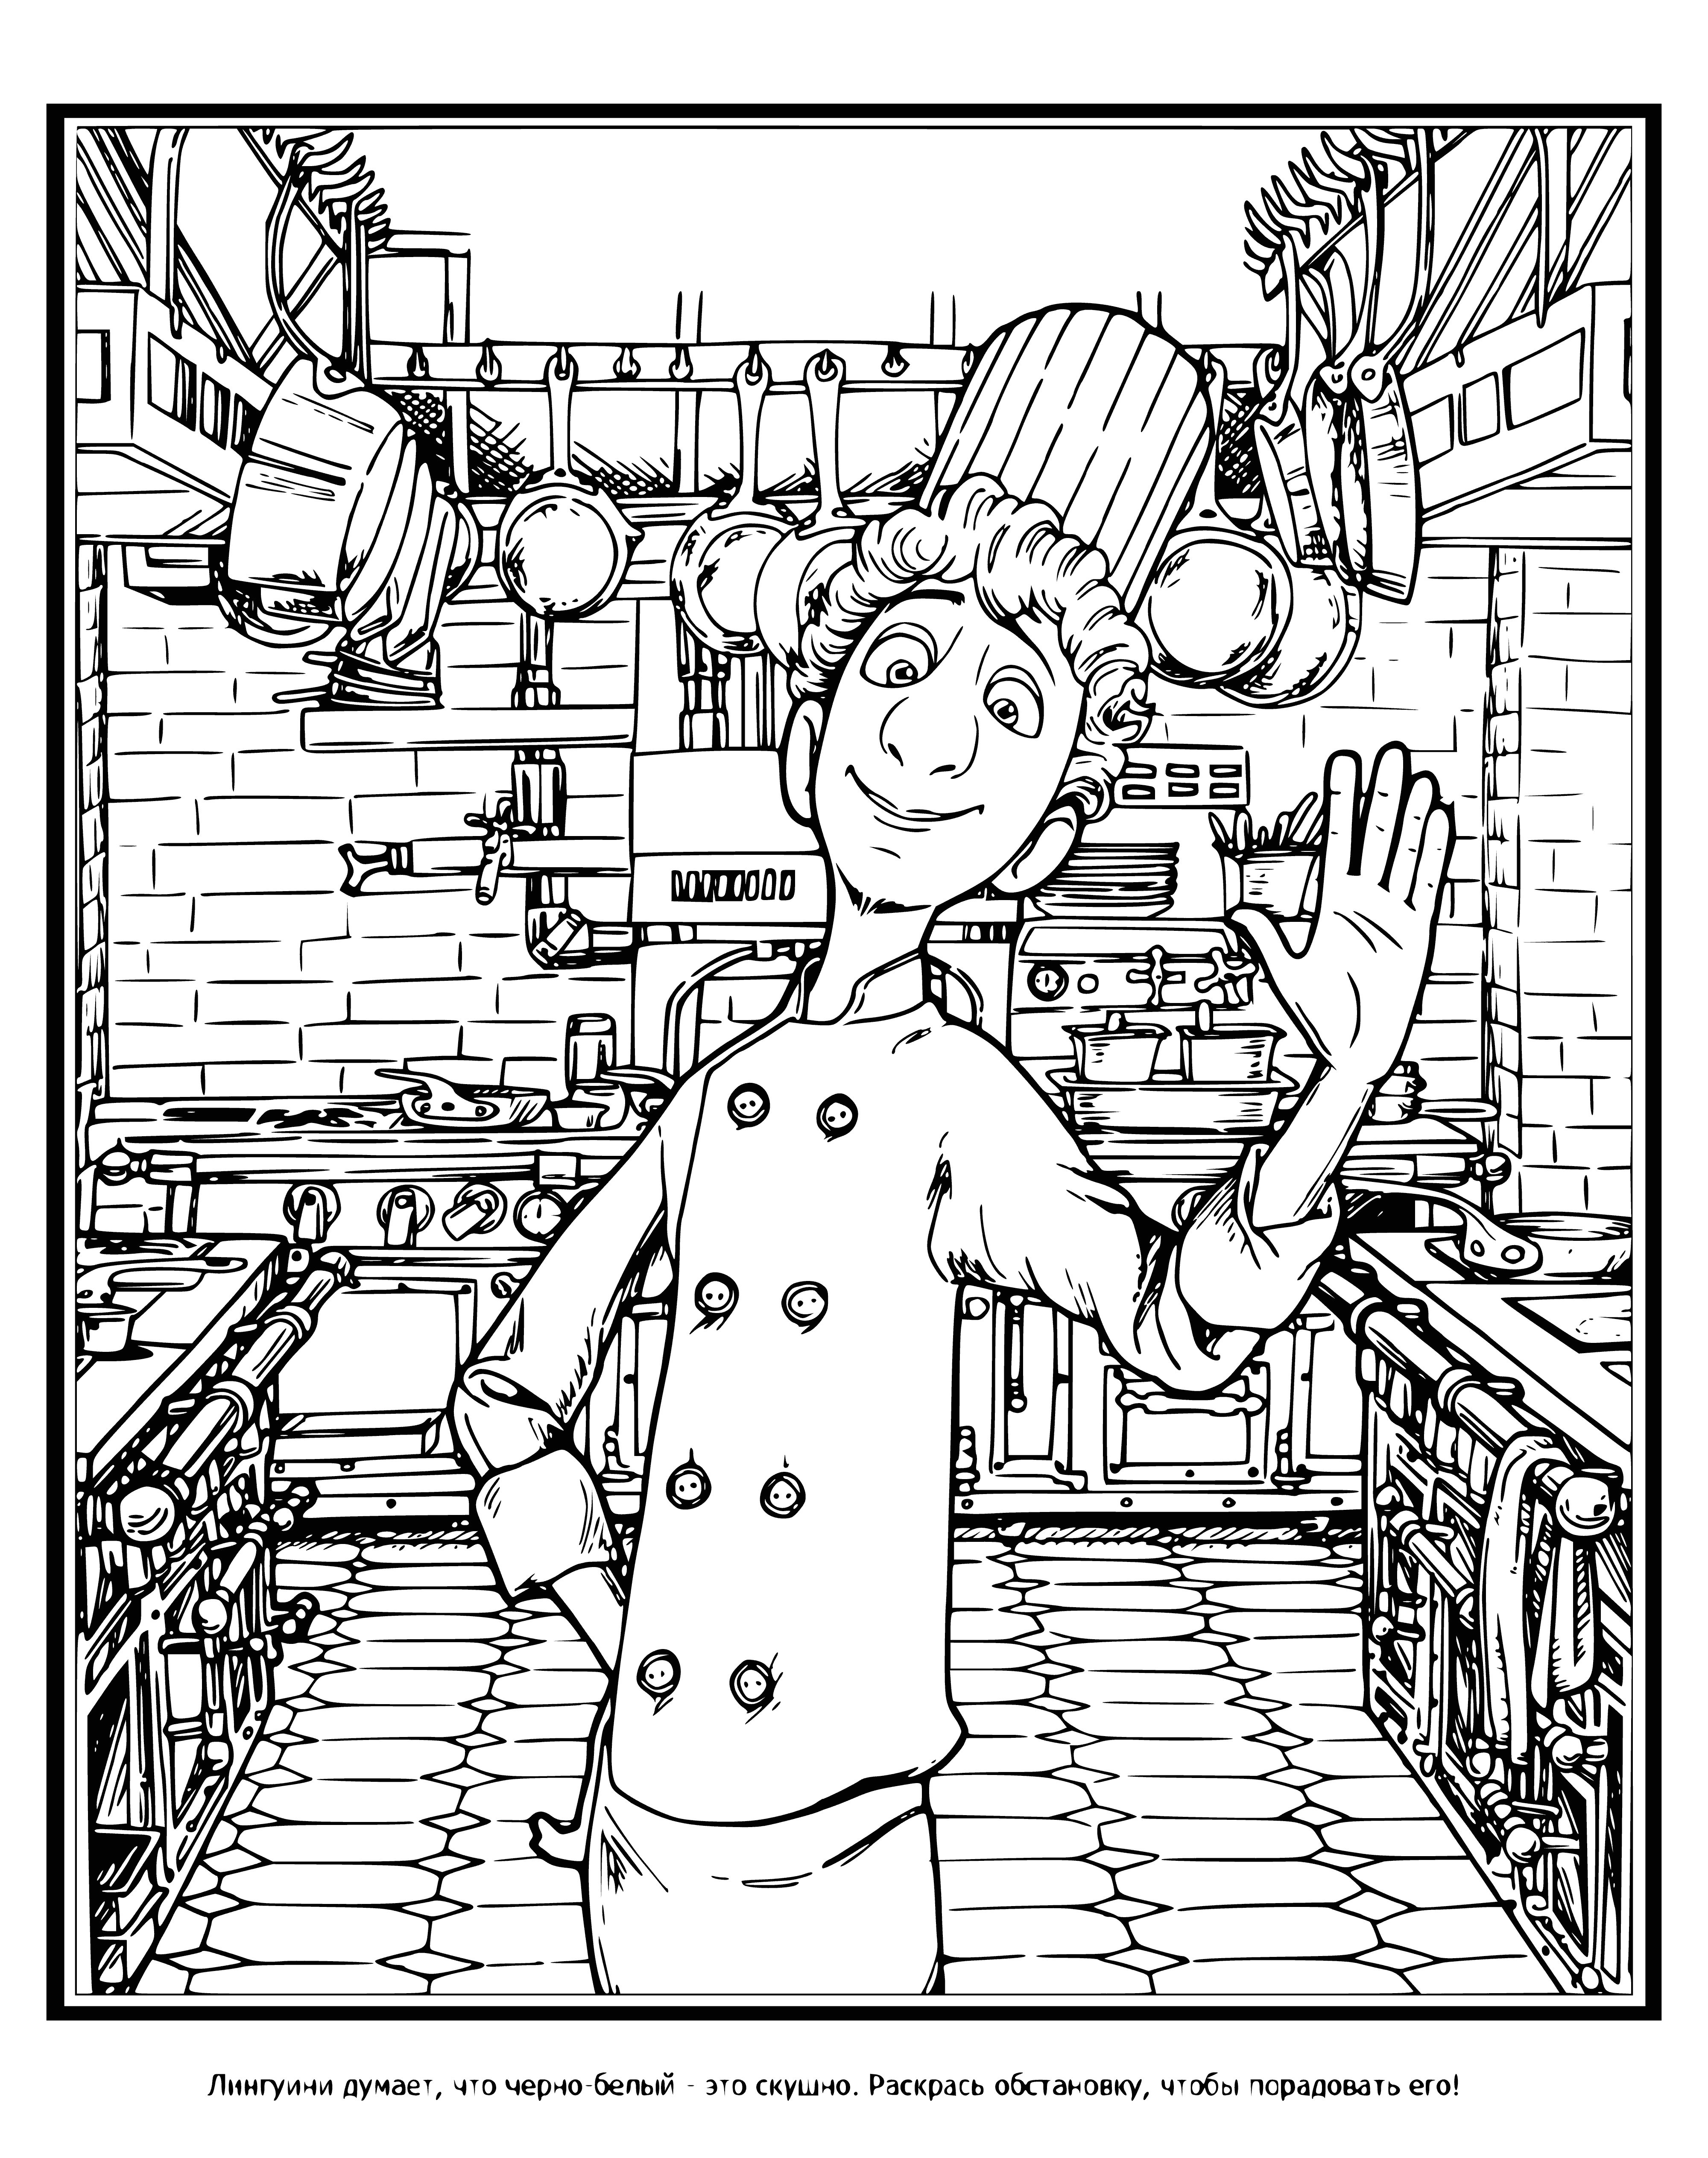 coloring page: Chef Linguini is a master in the kitchen, whipping up tasty dishes in his Paris restaurant and sending up a mouth-watering aroma.